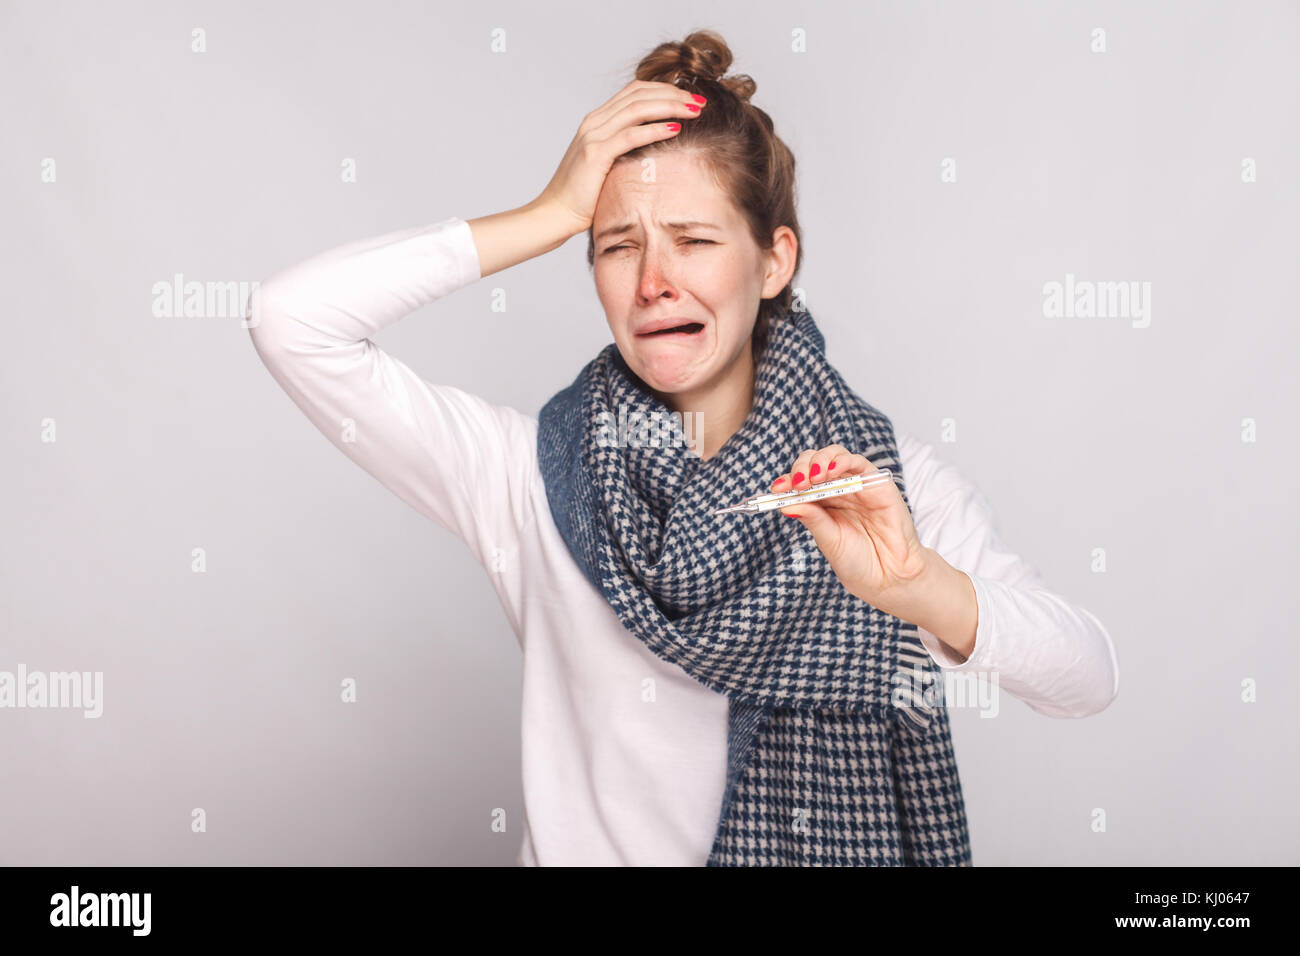 Unwell sick woman have temperature, holding head and cry. Studio shot, isolated on gray background Stock Photo